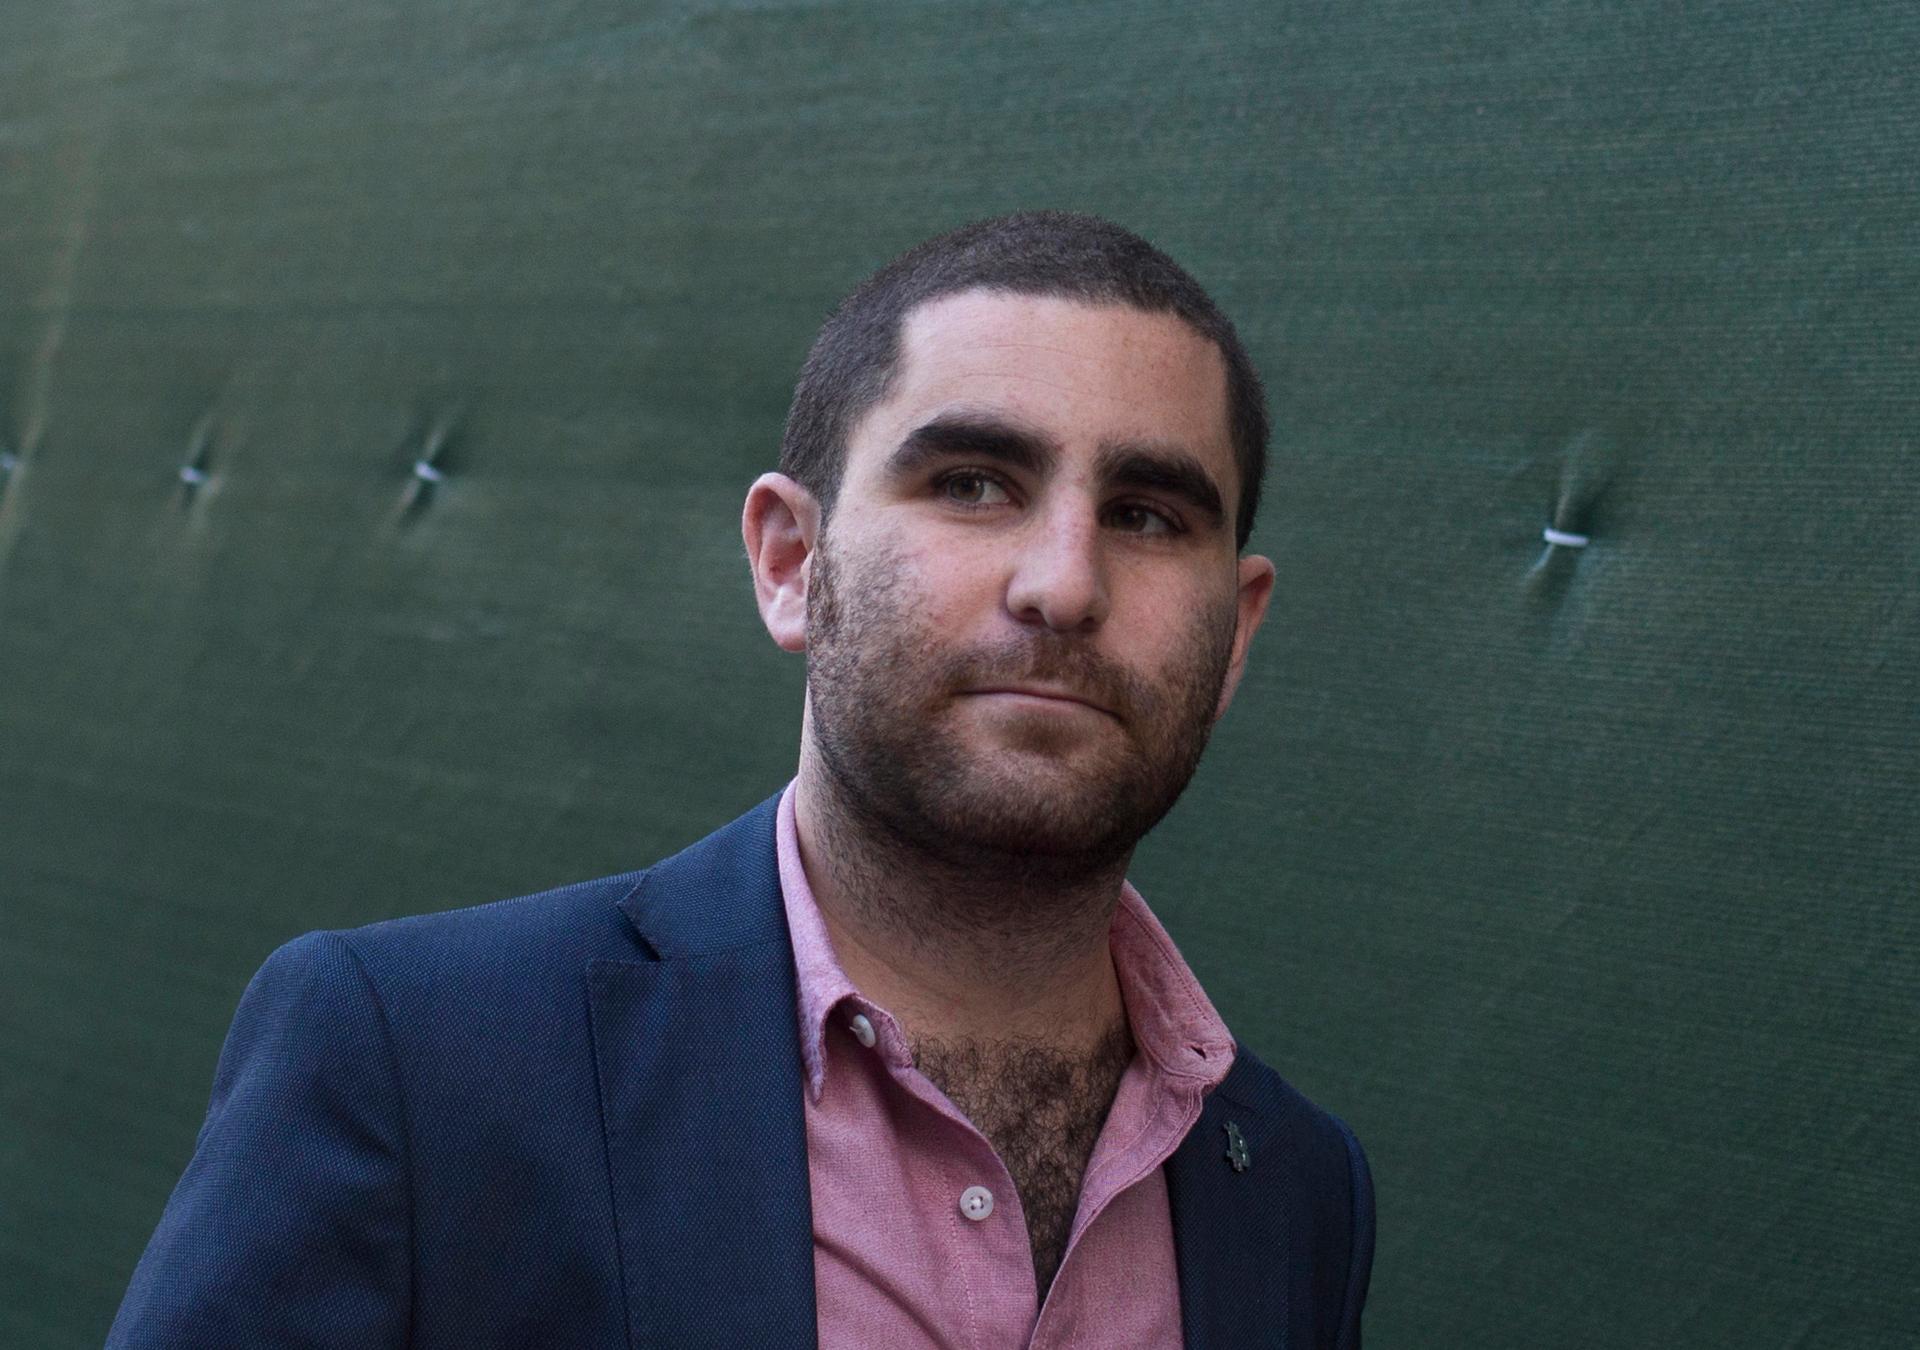 Bitcoin promoter Charlie Shrem walks out of federal court in Lower Manhattan on September 4, 2014. A judge later sentenced Shrem to two years in prison for aiding illegal transactions.